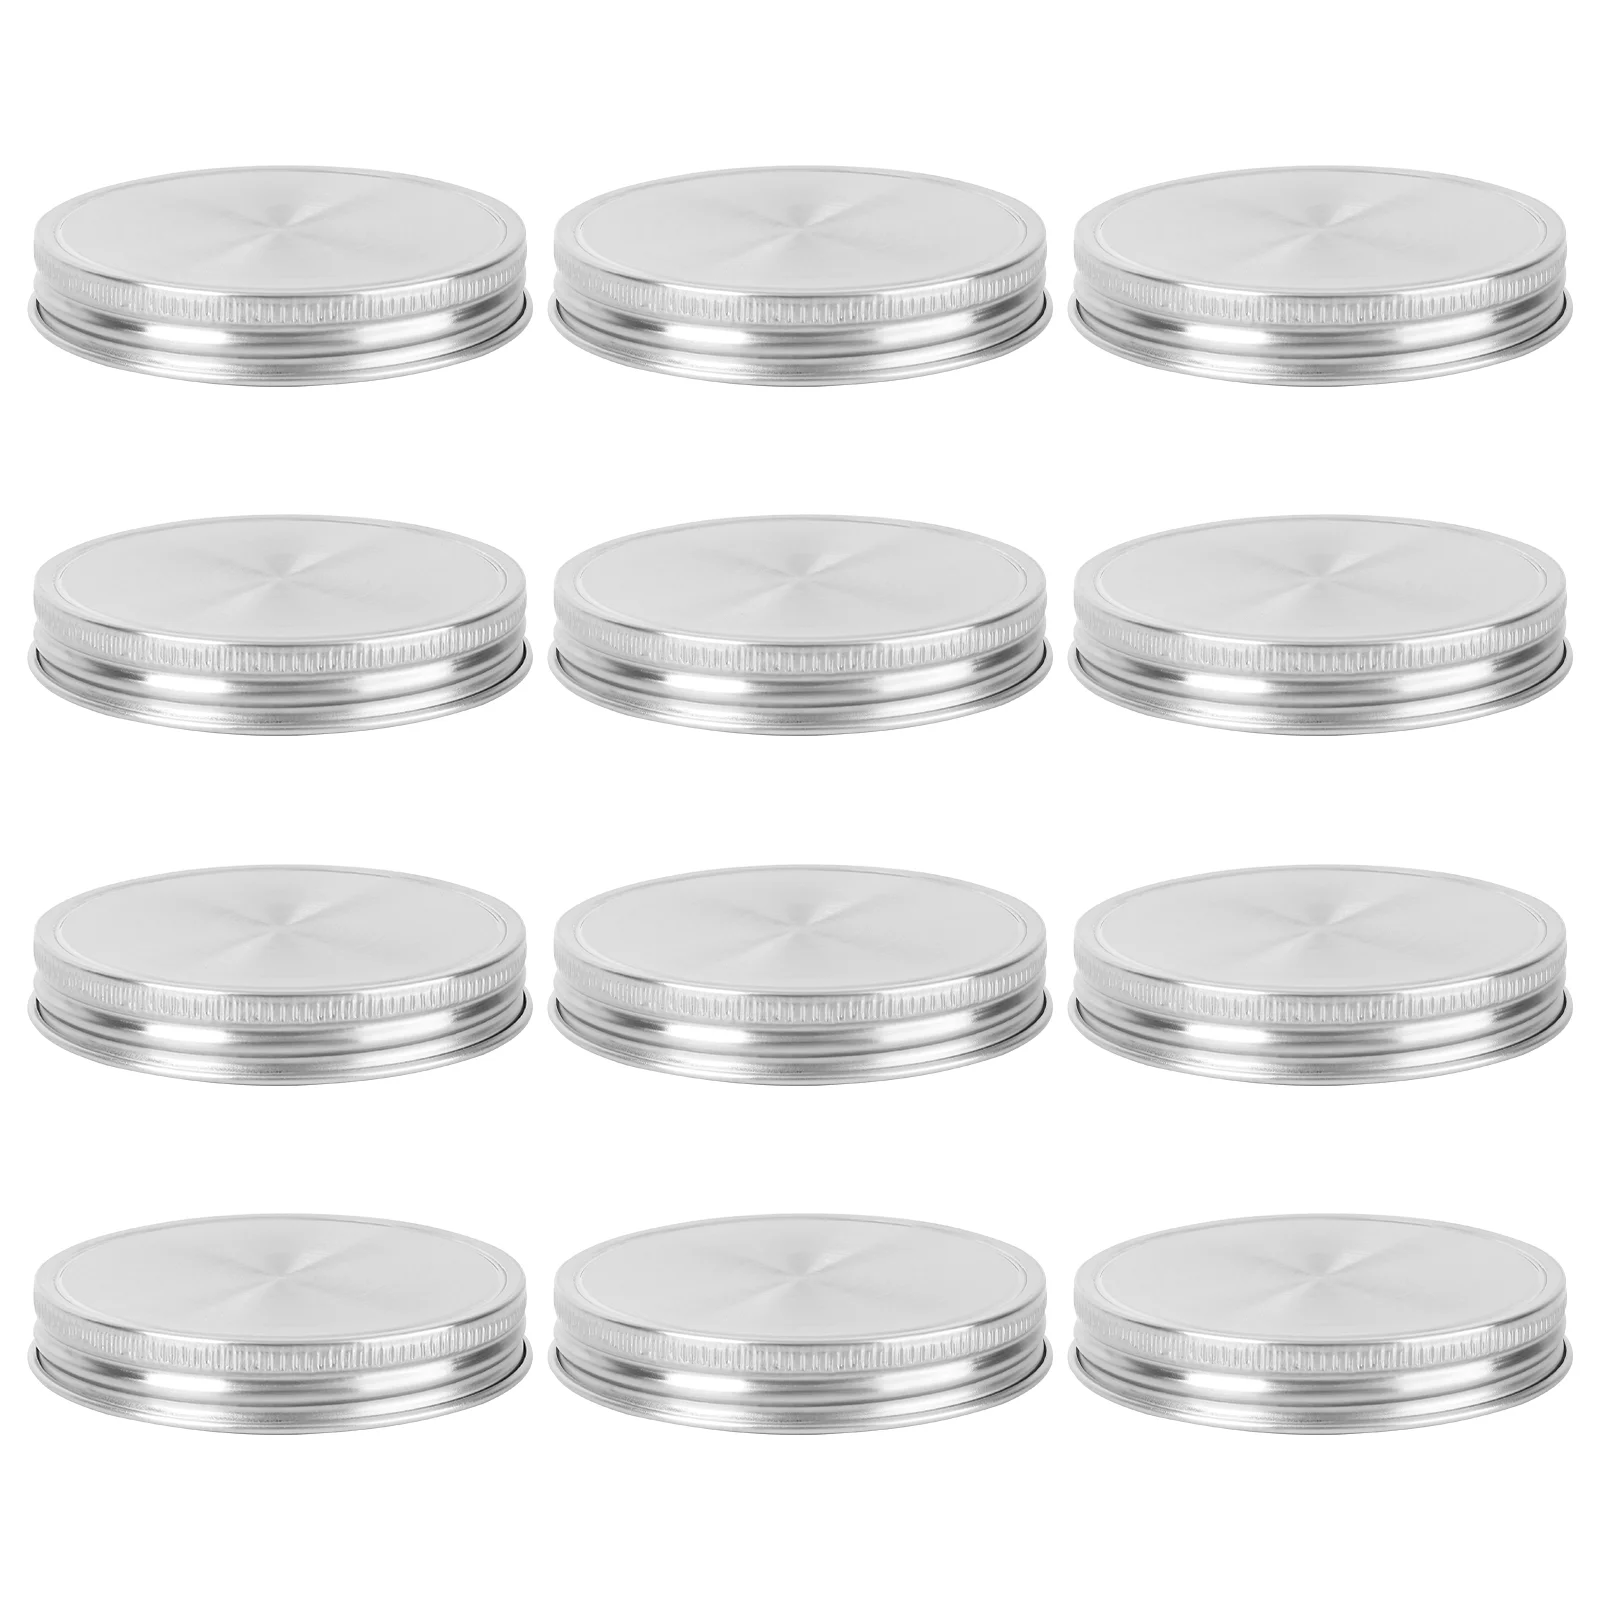 

12pcs Stainless Steel Lid Practical Leakproof Cover Convenient Sealing Lid for Home Kitchen with Silicone Gasket